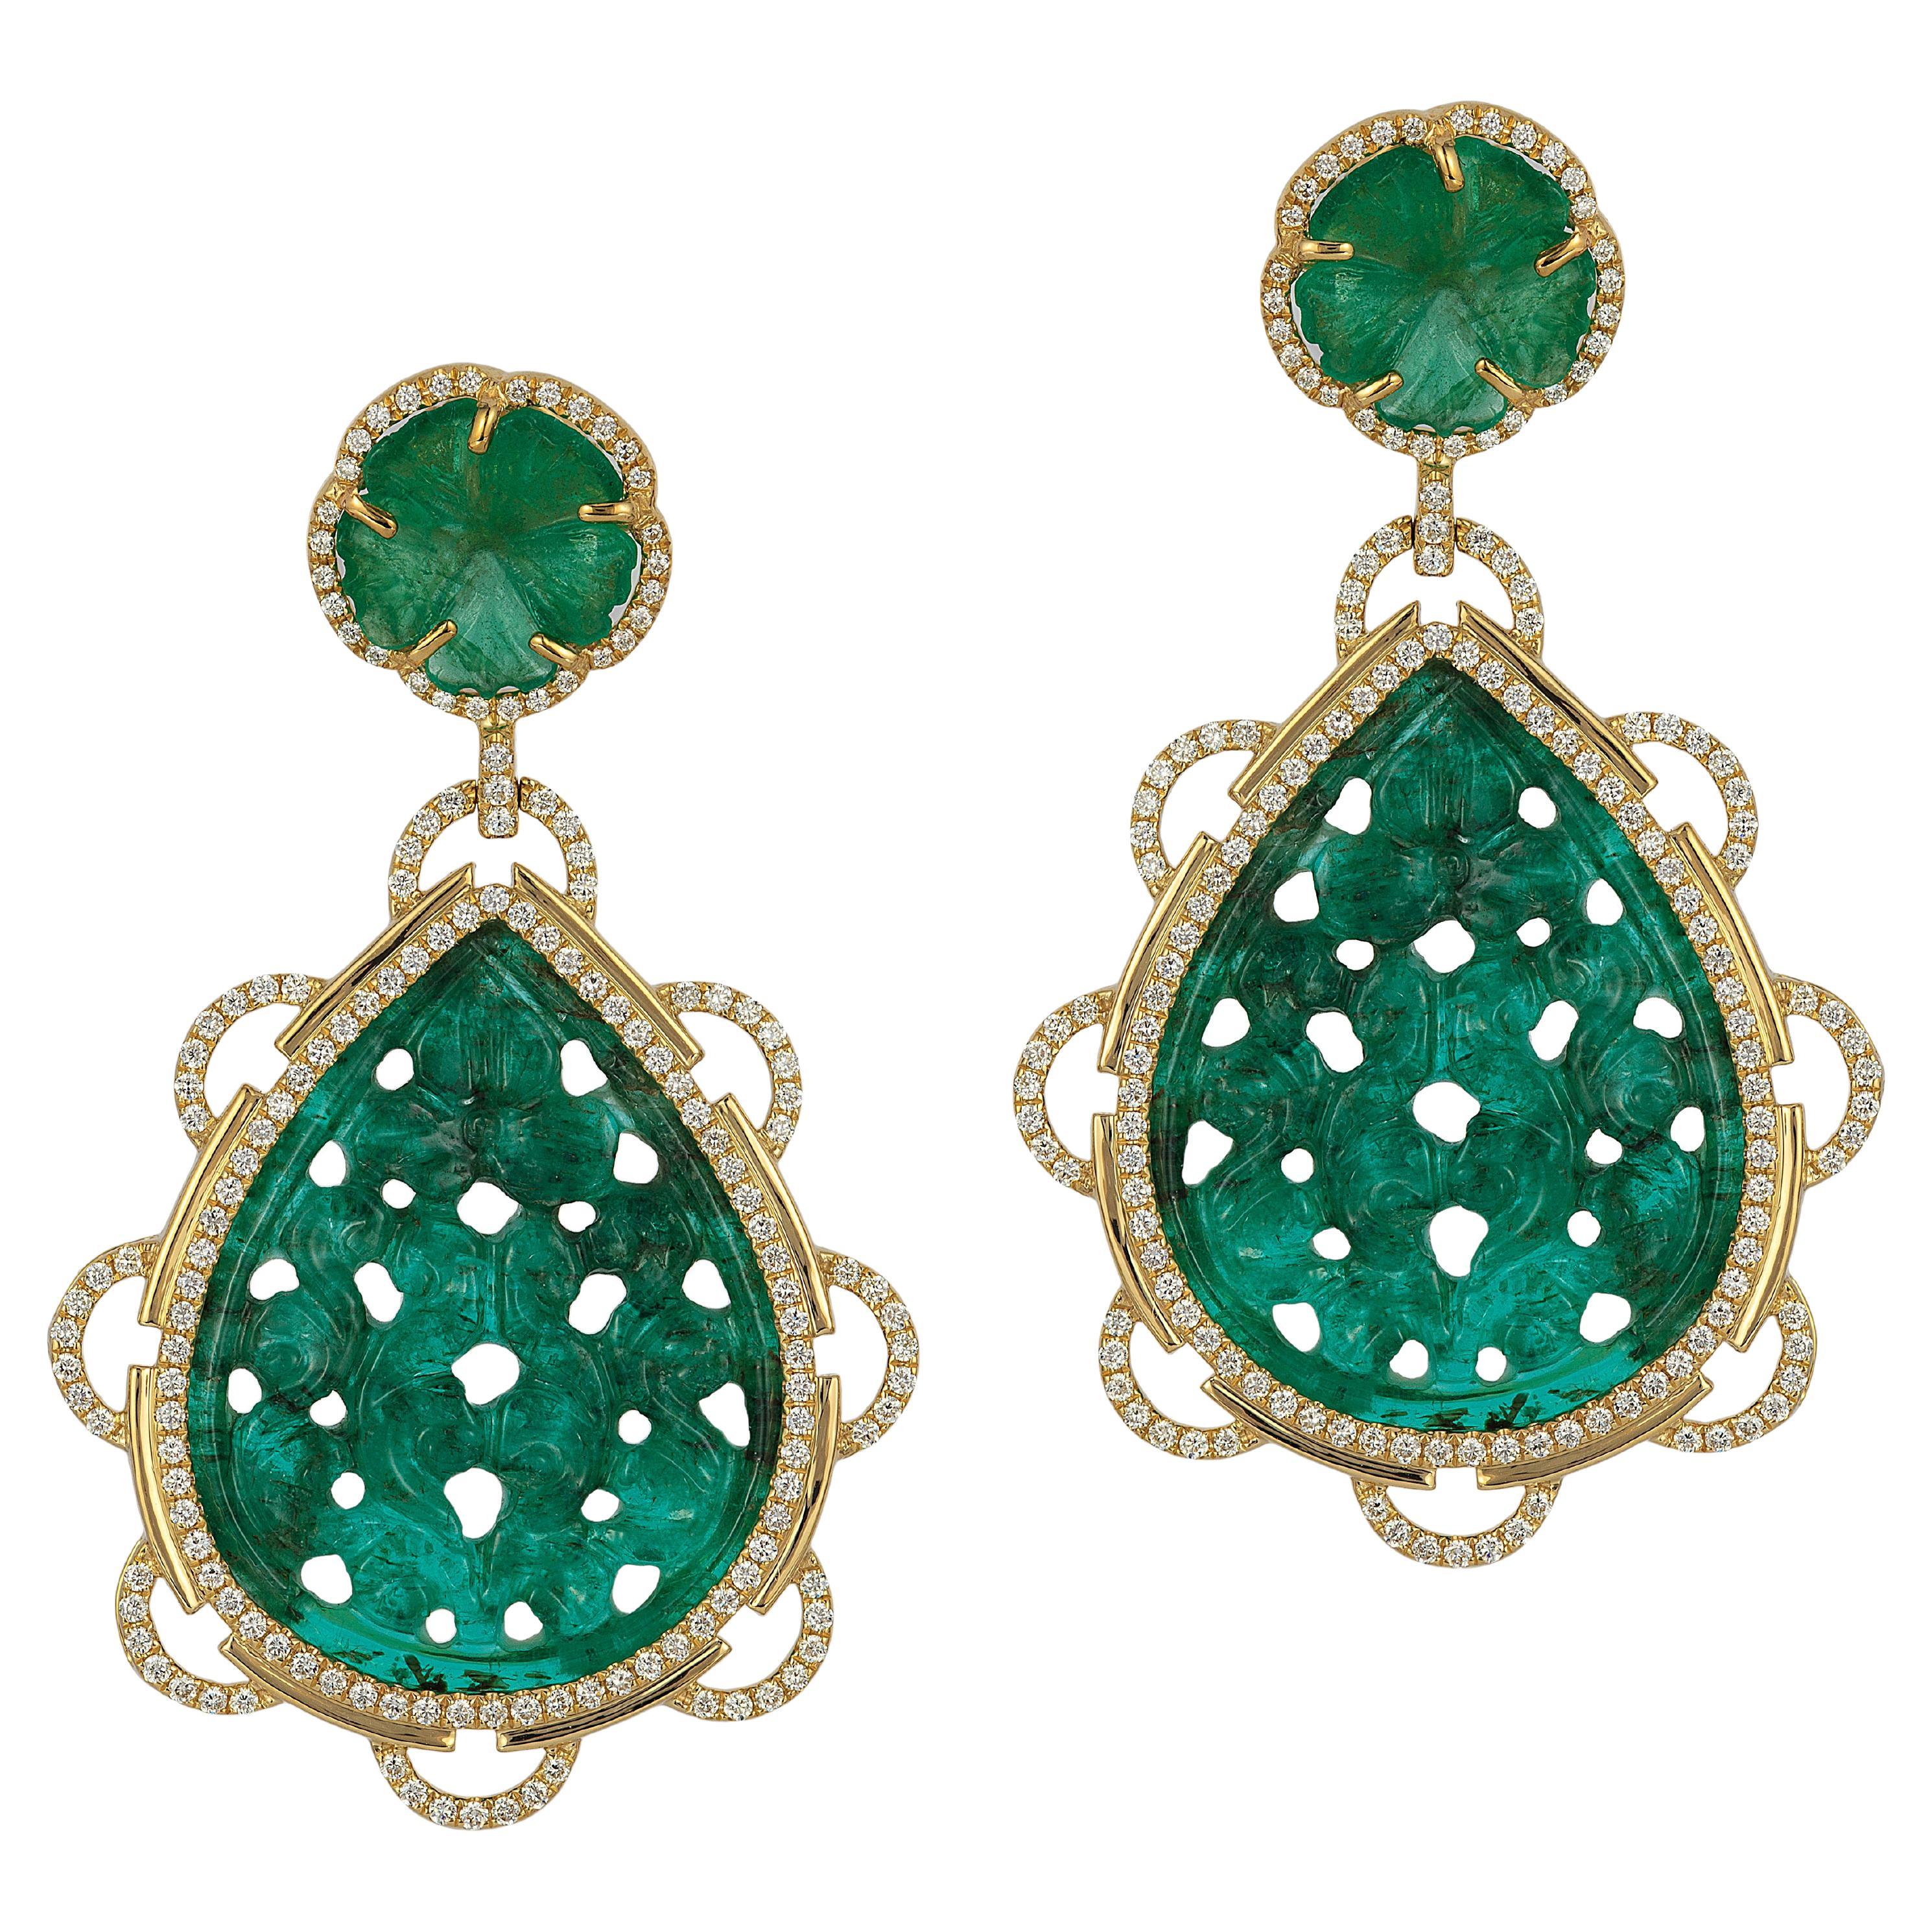 Goshwara Emerald Carved with Carved Flower and Diamond Earrings